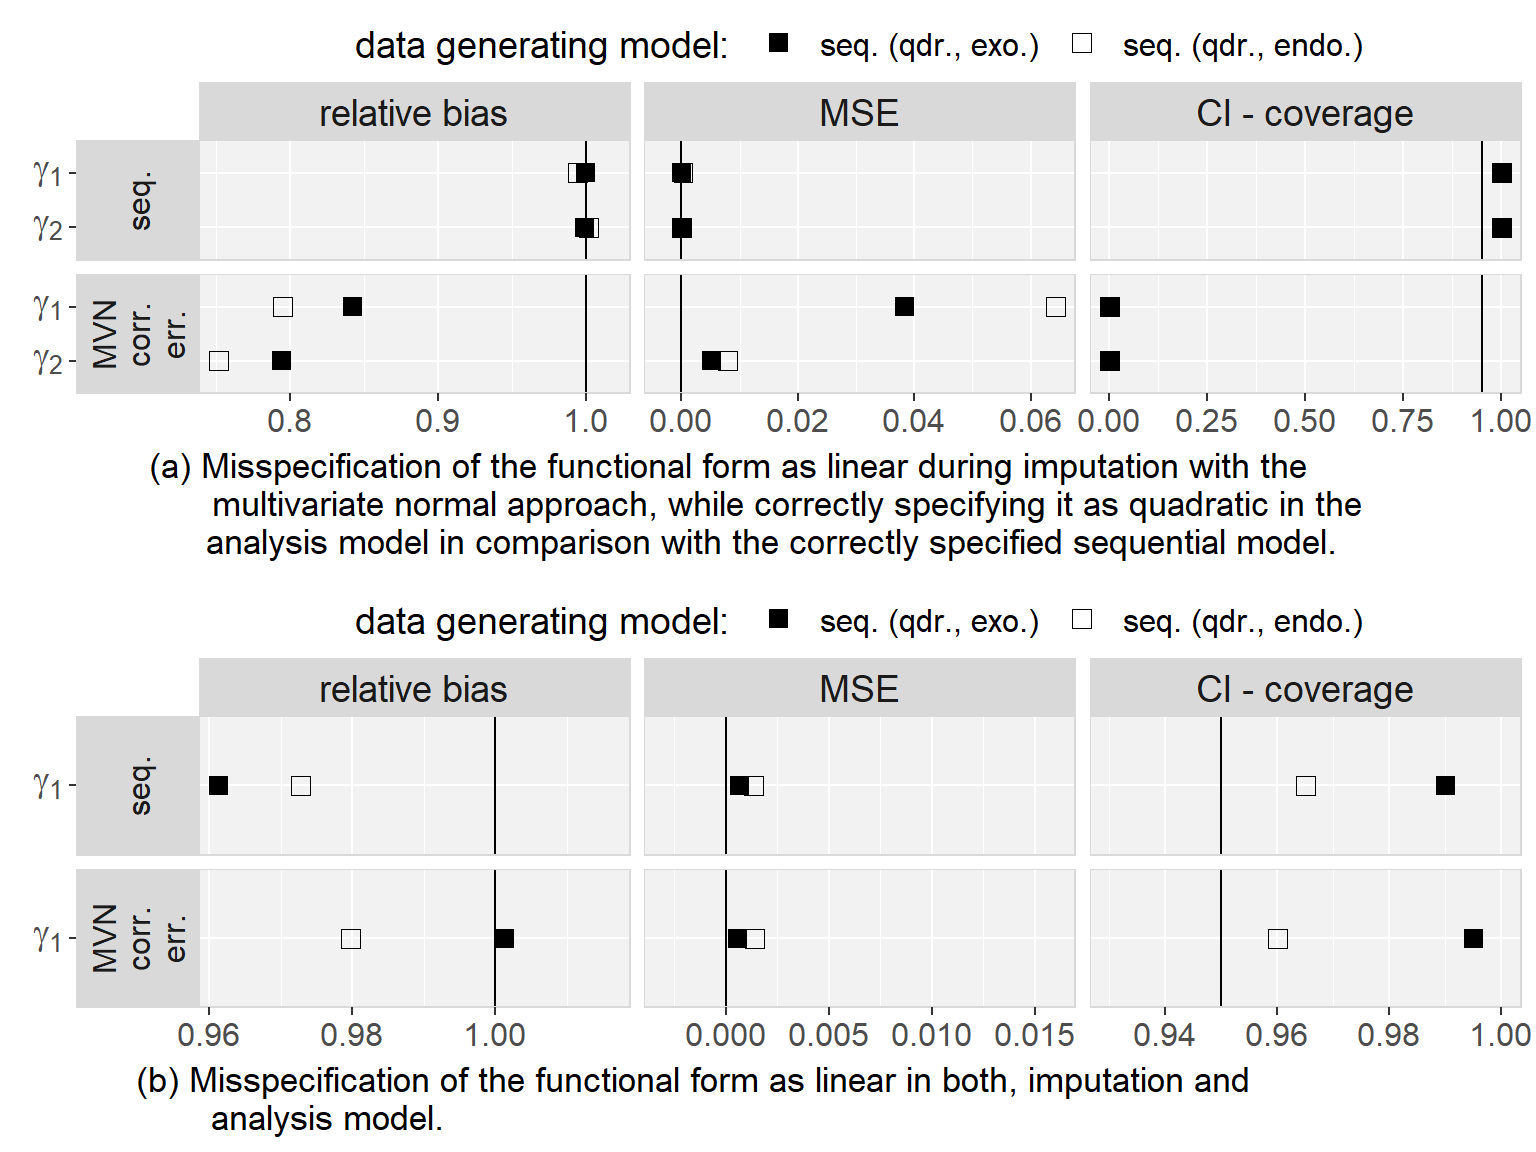 Relative bias, mean squared error (MSE), and proportion of CIs that covered the estimate from the
         analysis of the complete data, when imputation and analysis models
         were correctly specified with regards to exo- or endogeneity but
         misspecified with regards to the functional form.
         The vertical lines mark the respective desired values.